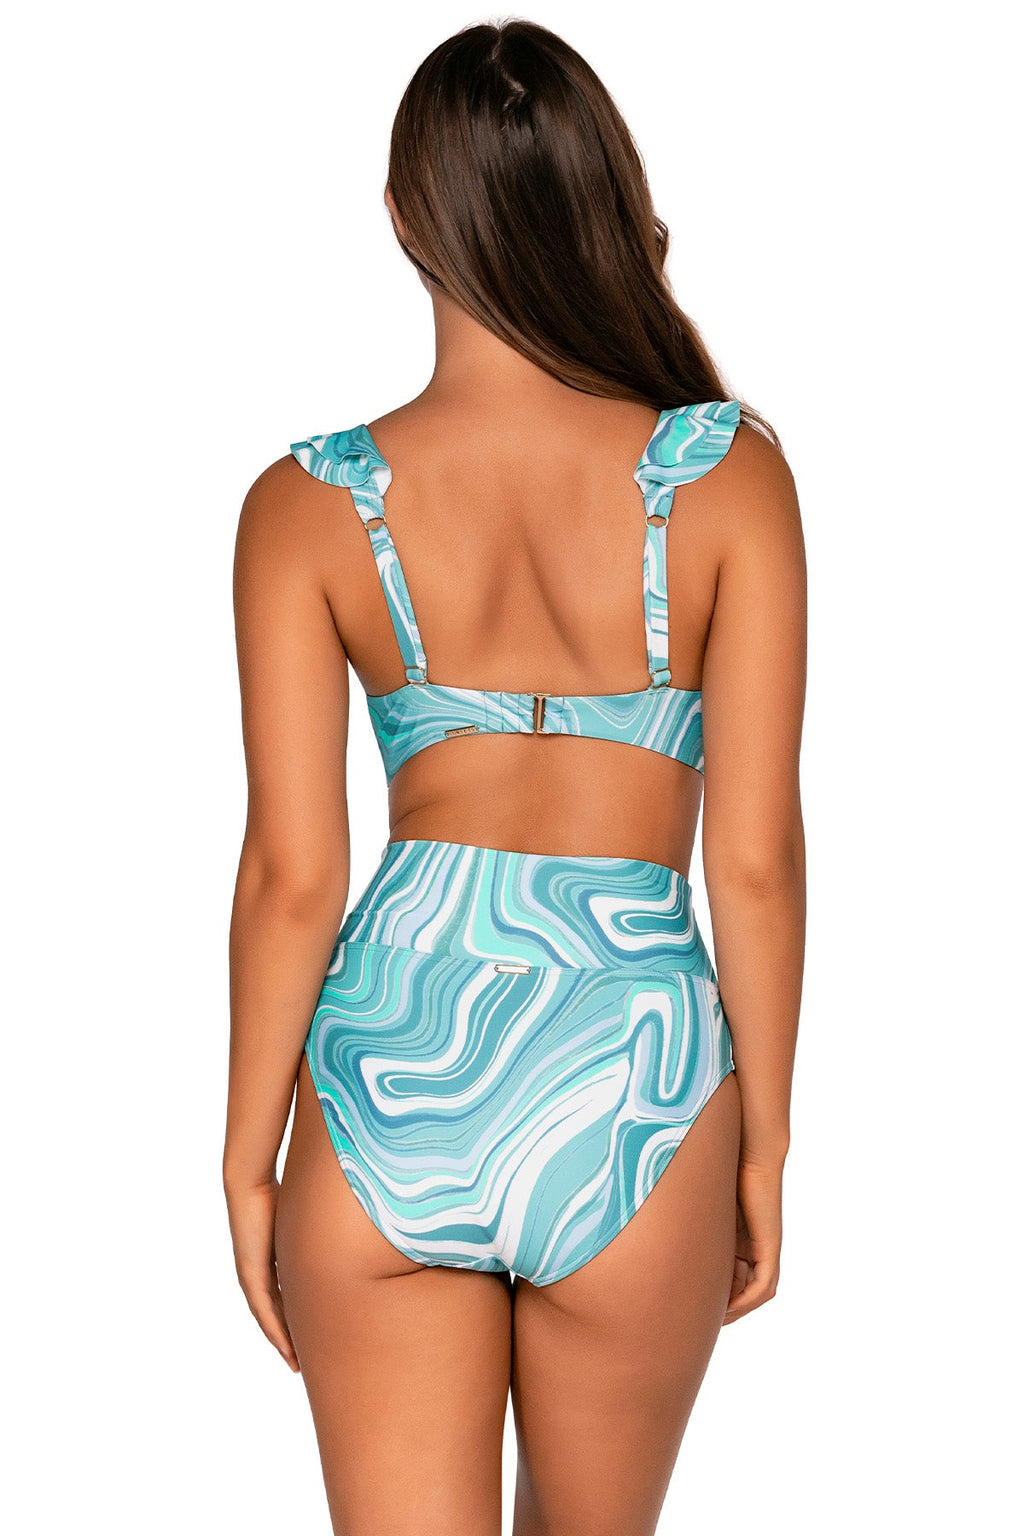 South Beach Swimsuits Sunsets, 75, Taylor Tankini, Sweet Escape, 32D/34C